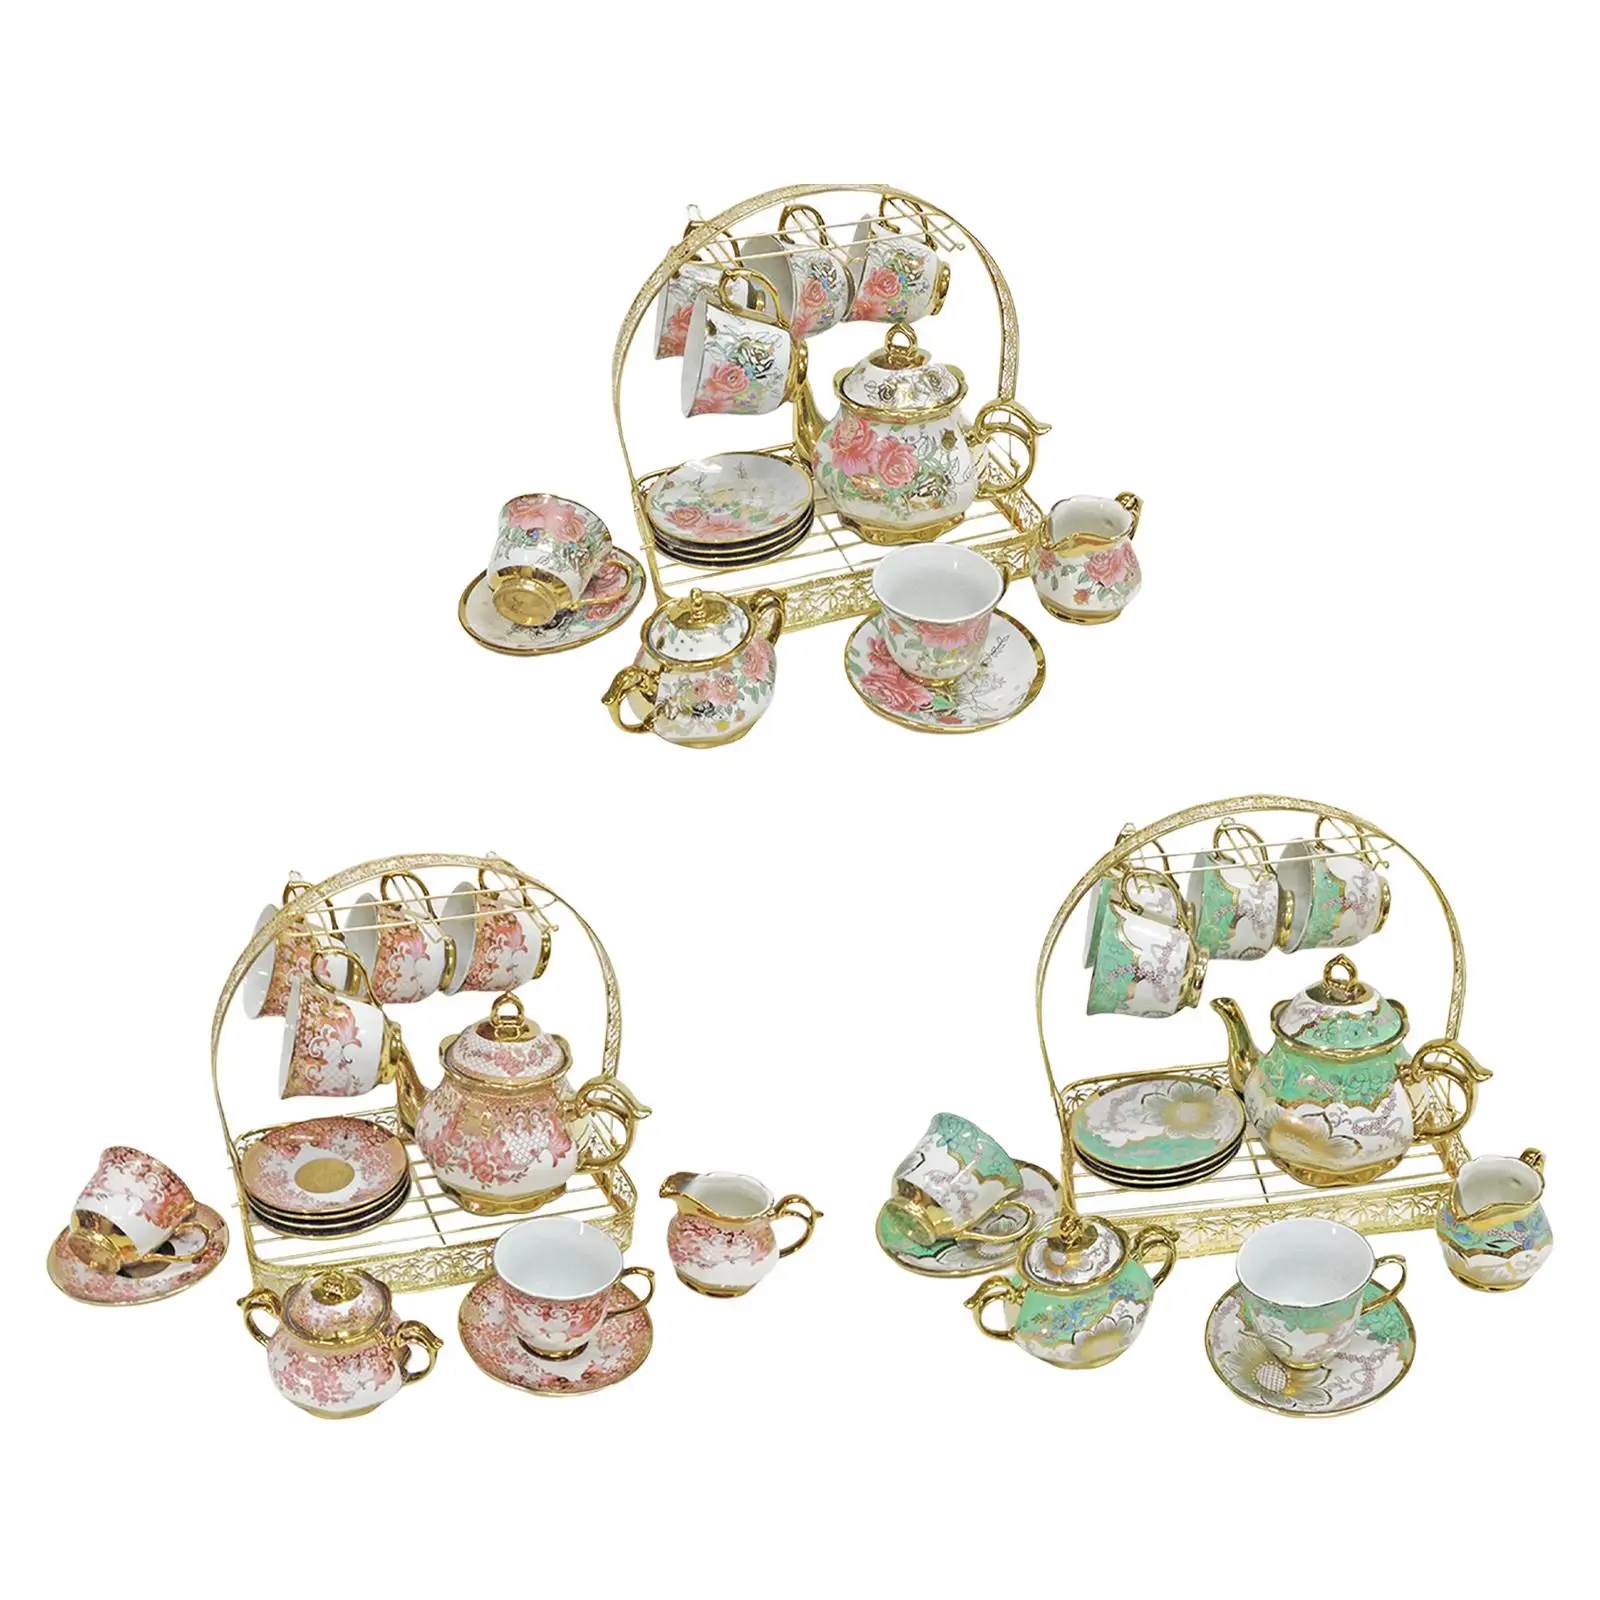 Ceramic Cups and Saucers Set Floral Tea Cups Nordic with Stand Porcelain Tea Cups Set for Home Dining Room Tea Party Living Room